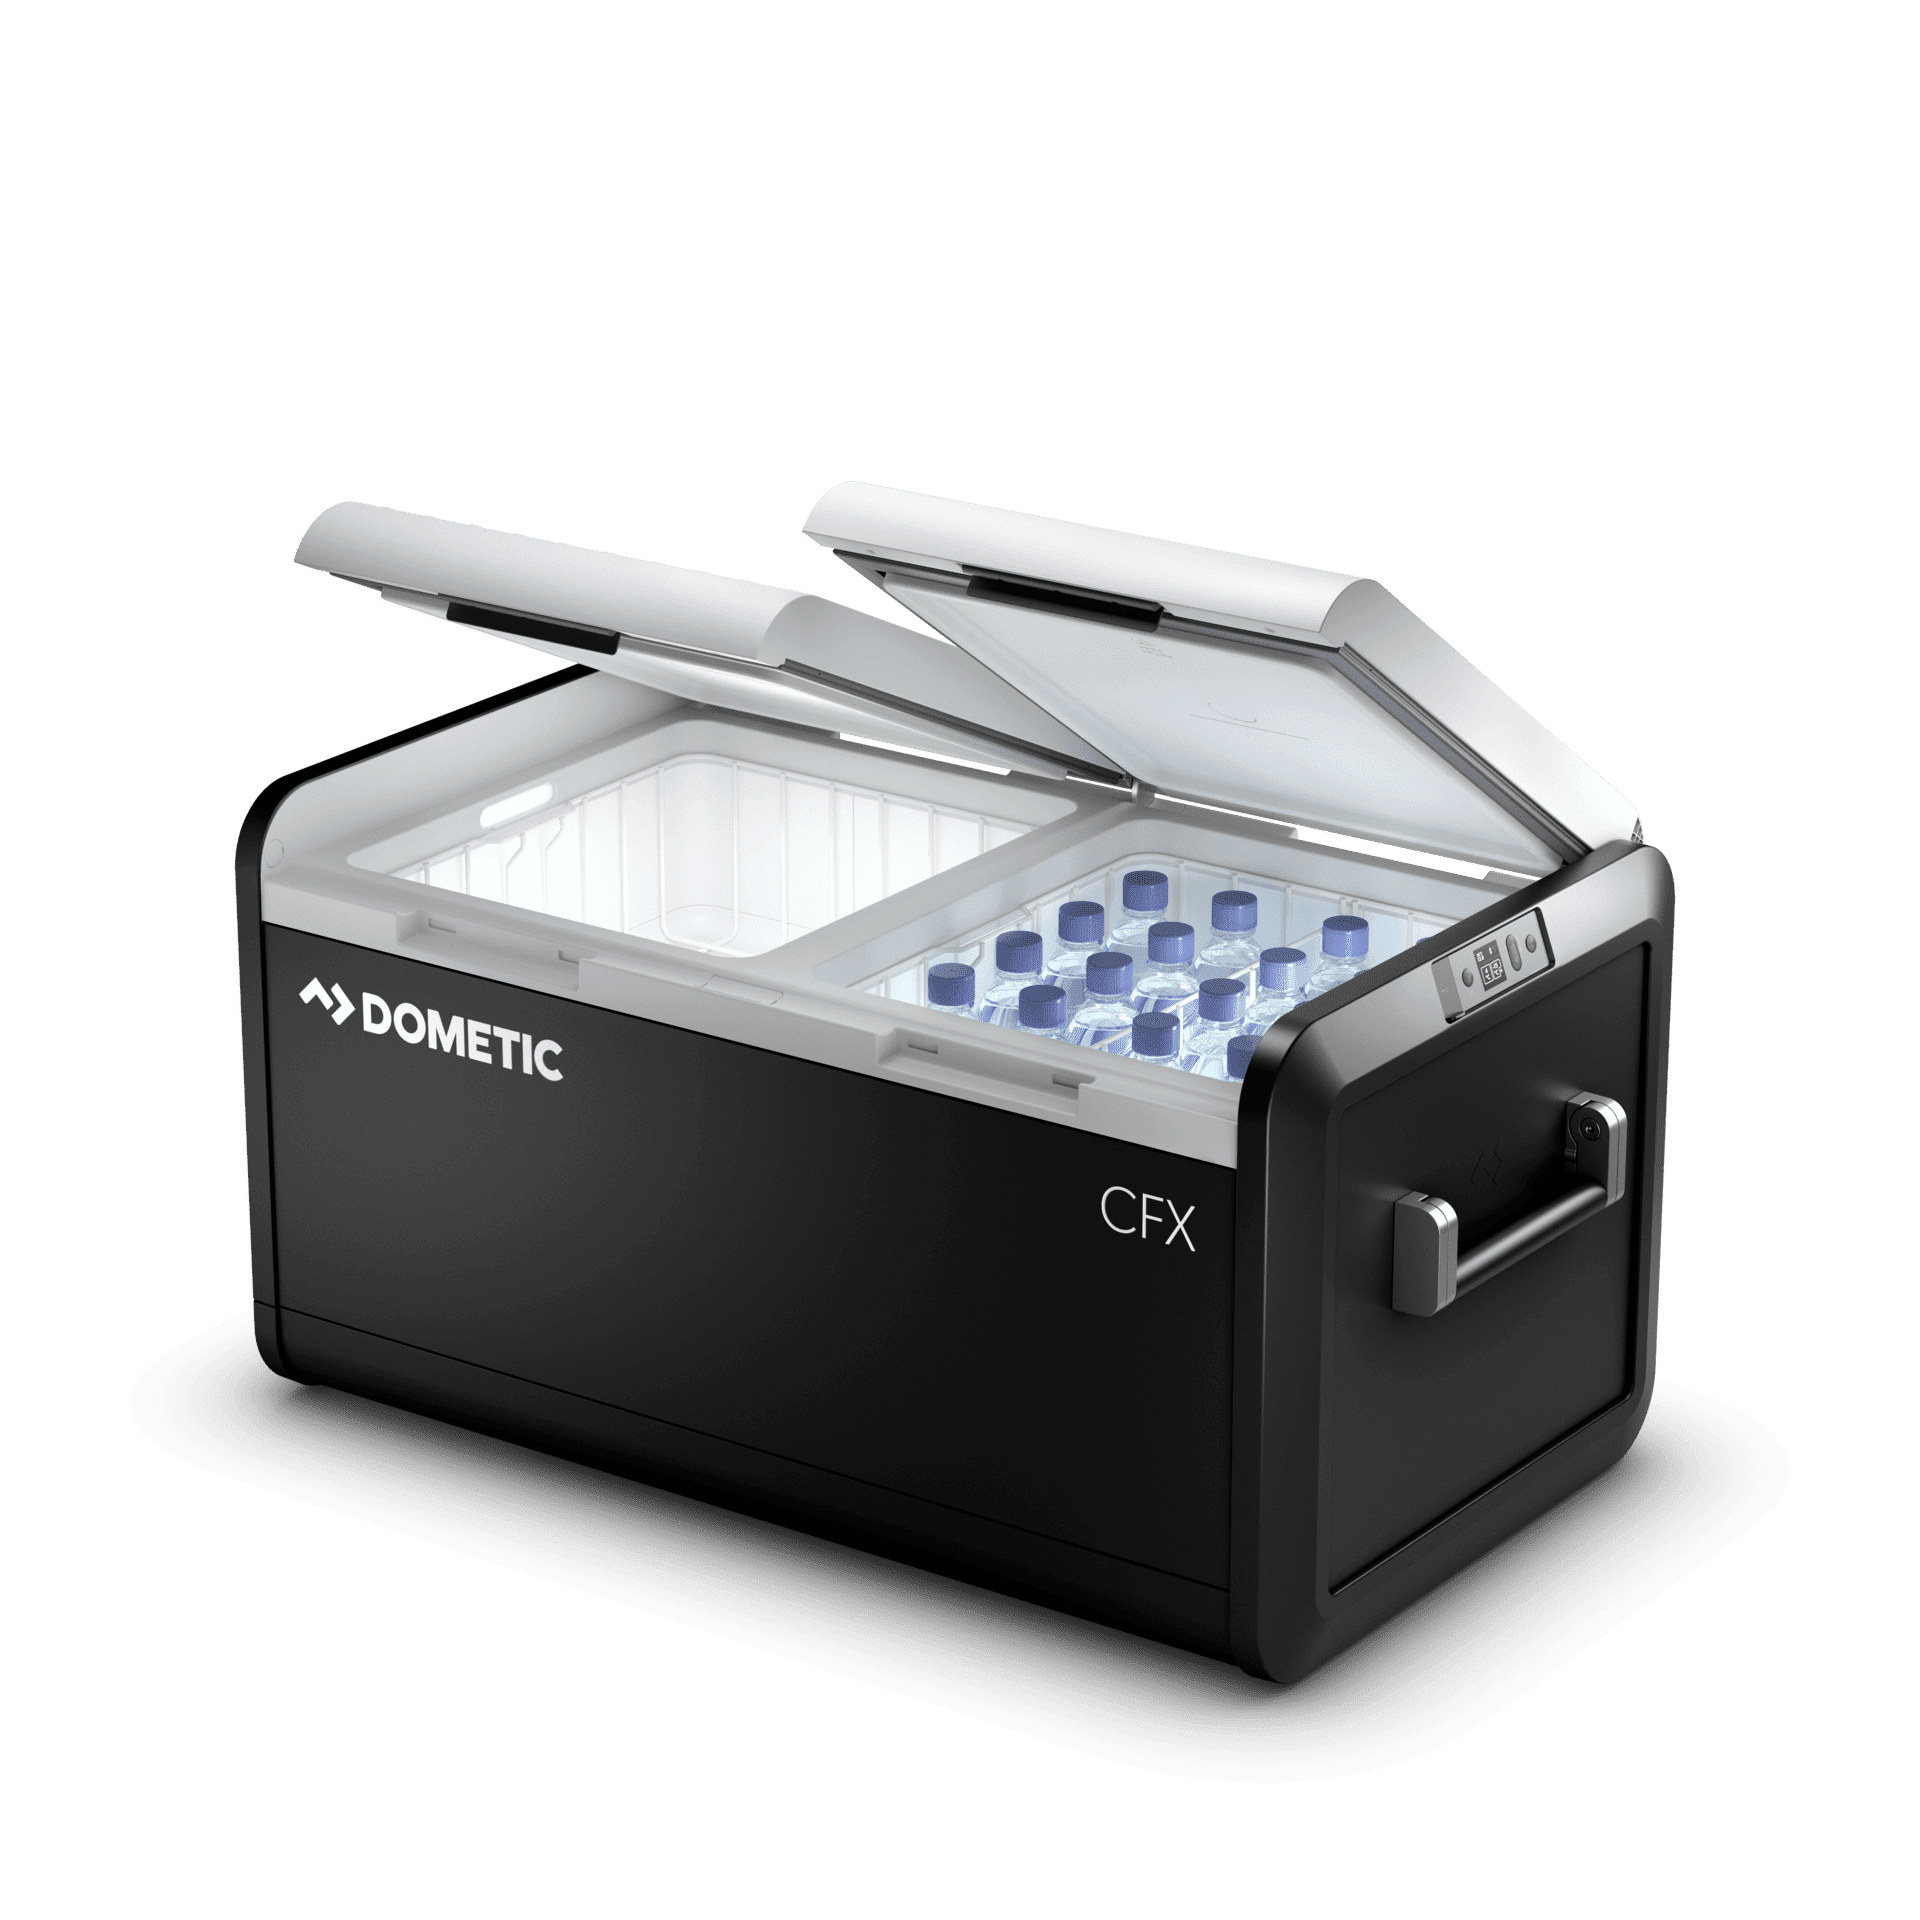 Dometic CFX3 95 Powered Cooer Dual Zone